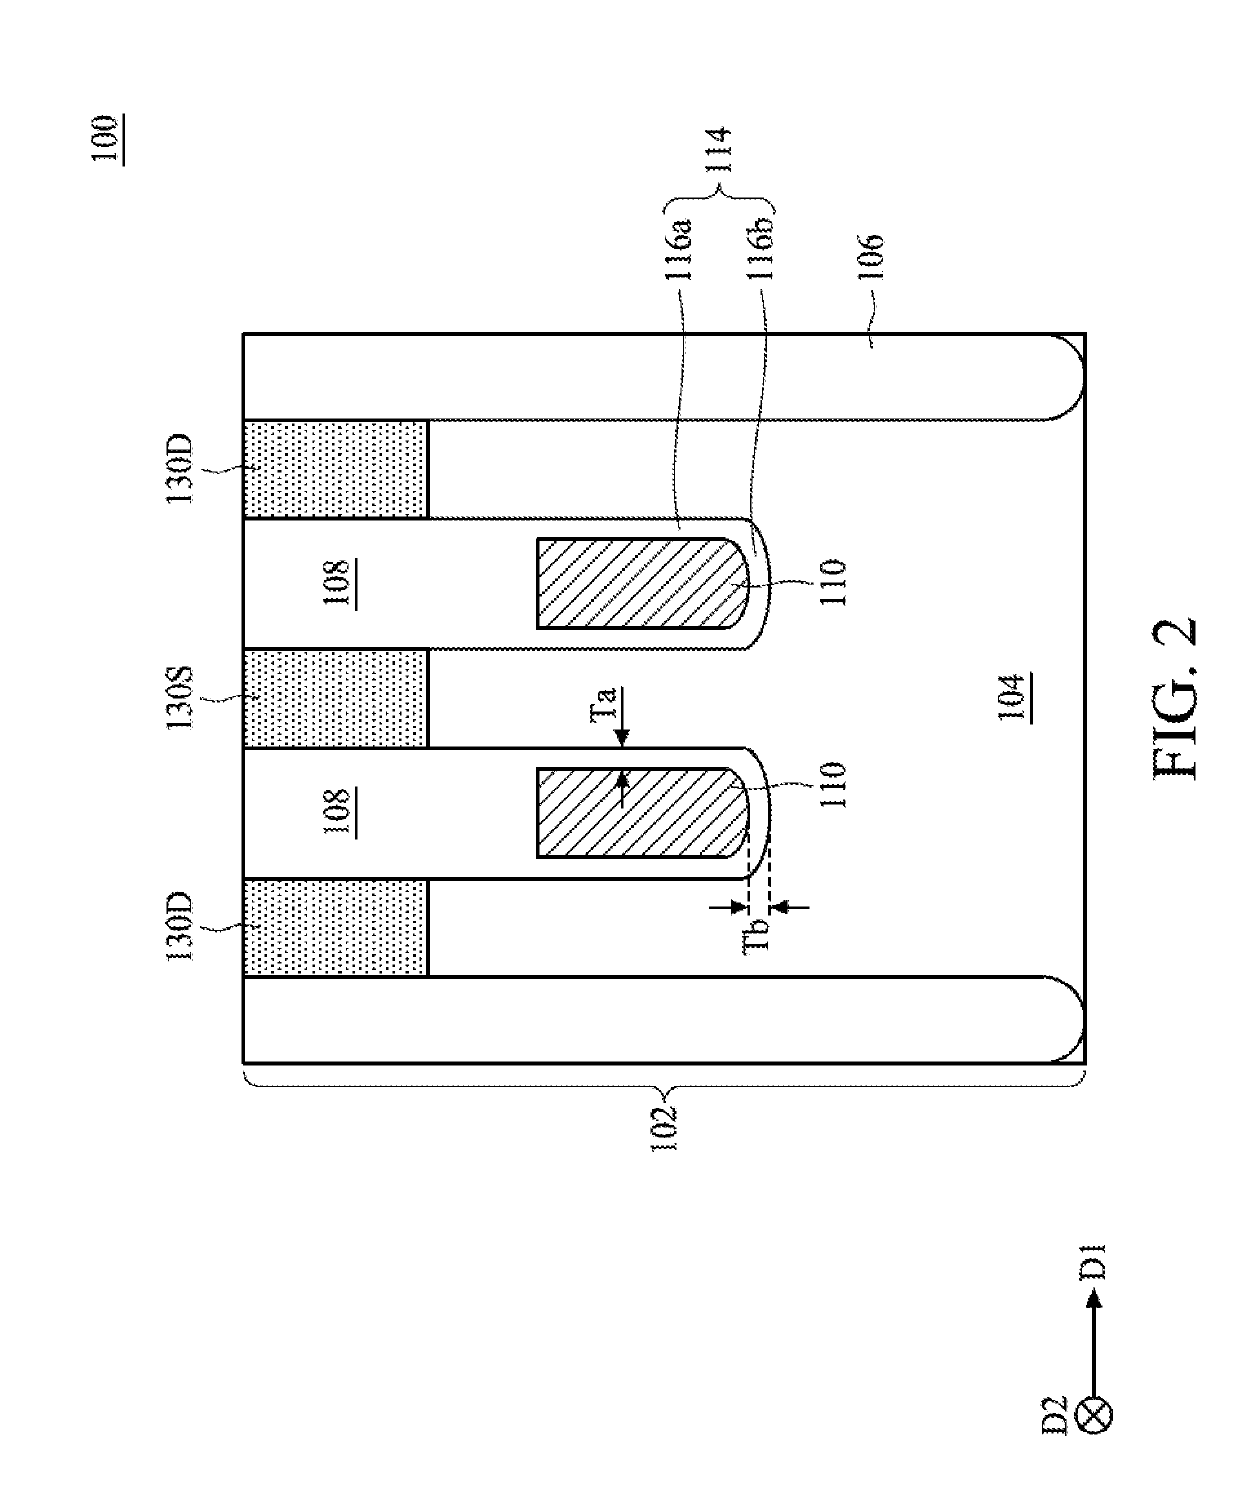 Transistor structure and semiconductor layout structure